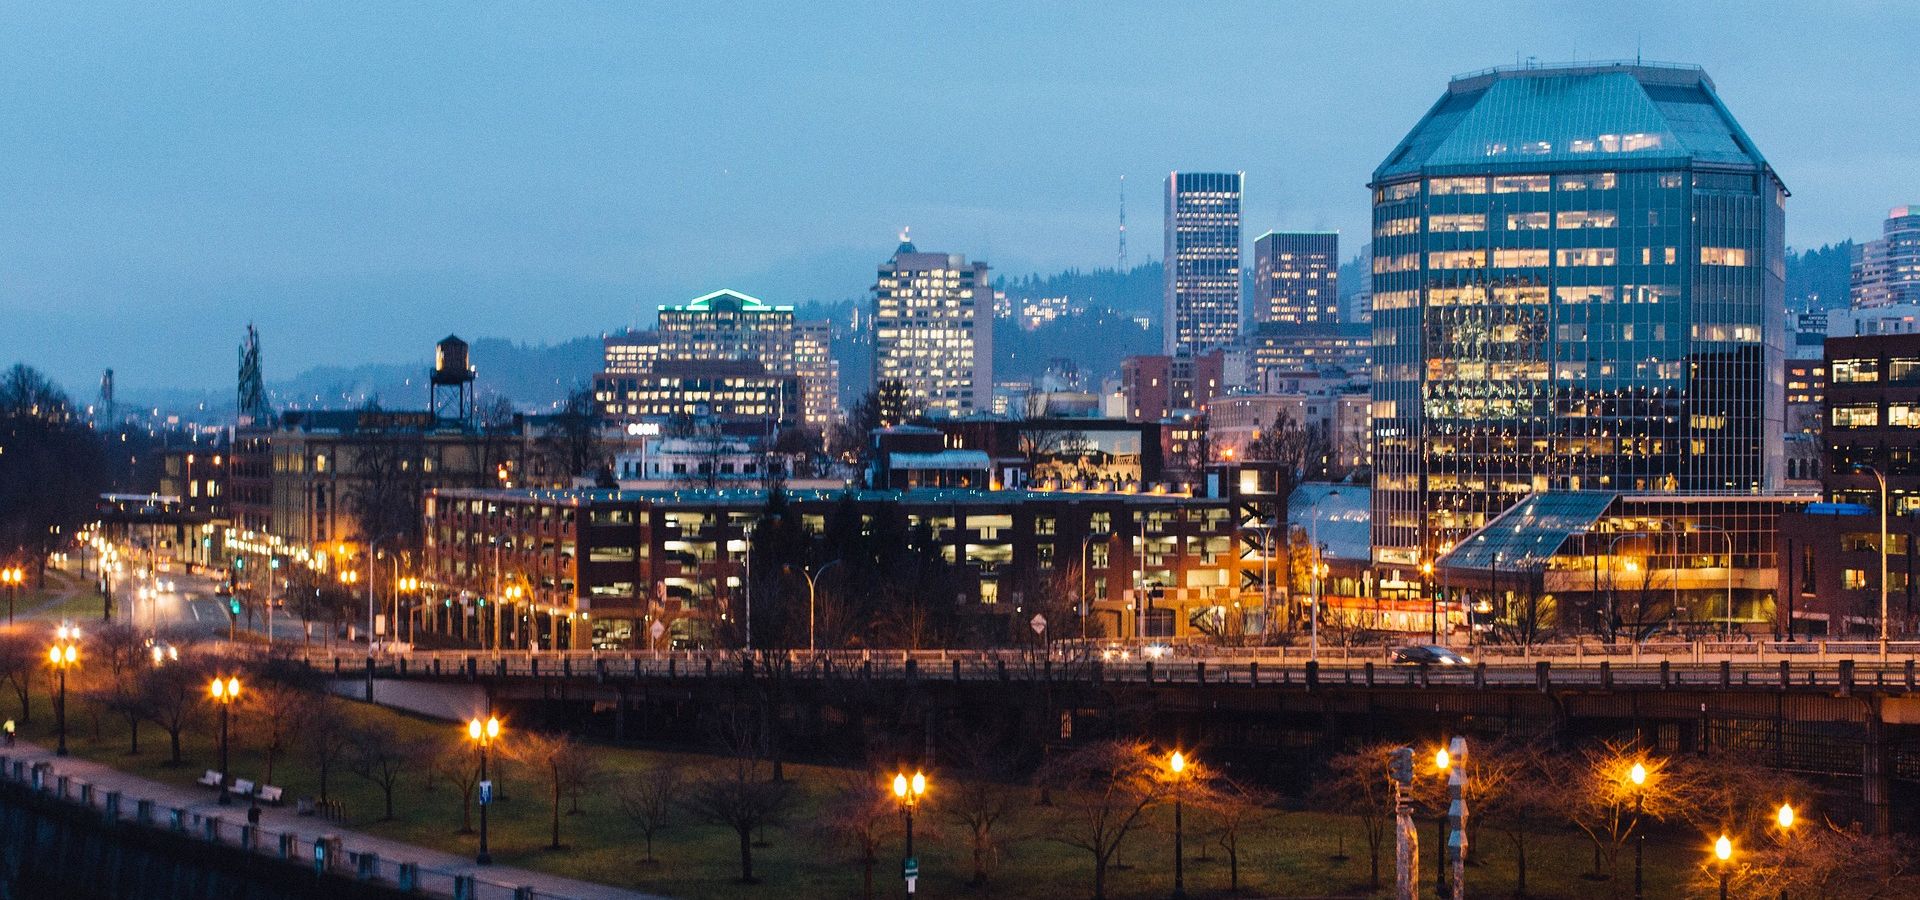 While hundreds of cities and elected officials have made pledges and plans to cut carbon, only a handful have earmarked funding to take action. Portland is one of them and will build a clean energy fund.